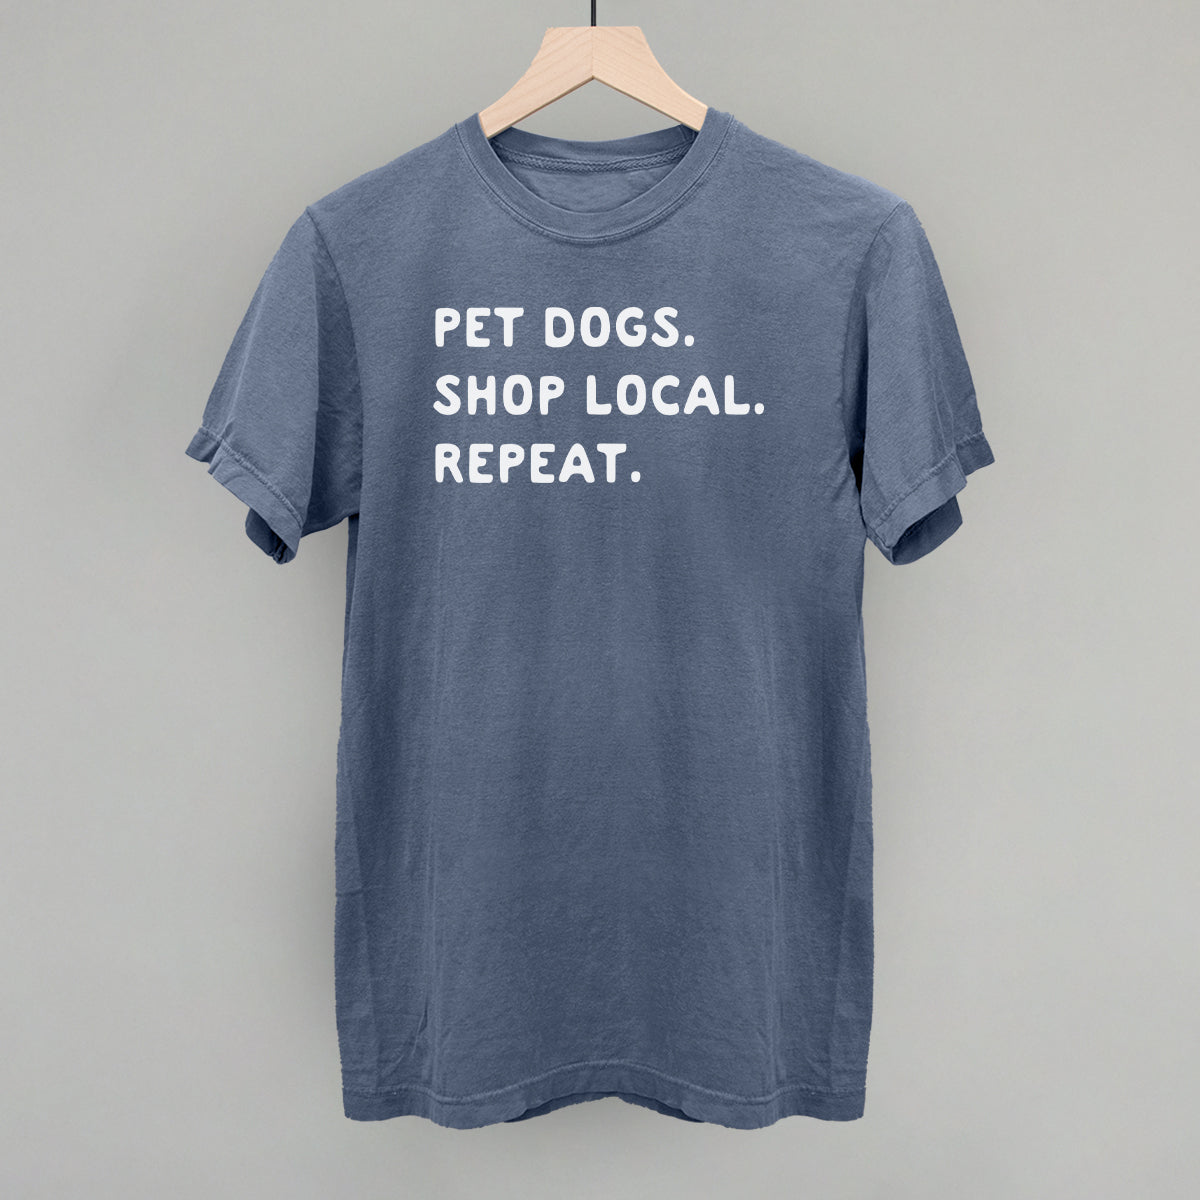 Pet Dogs. Shop Local. Repeat.